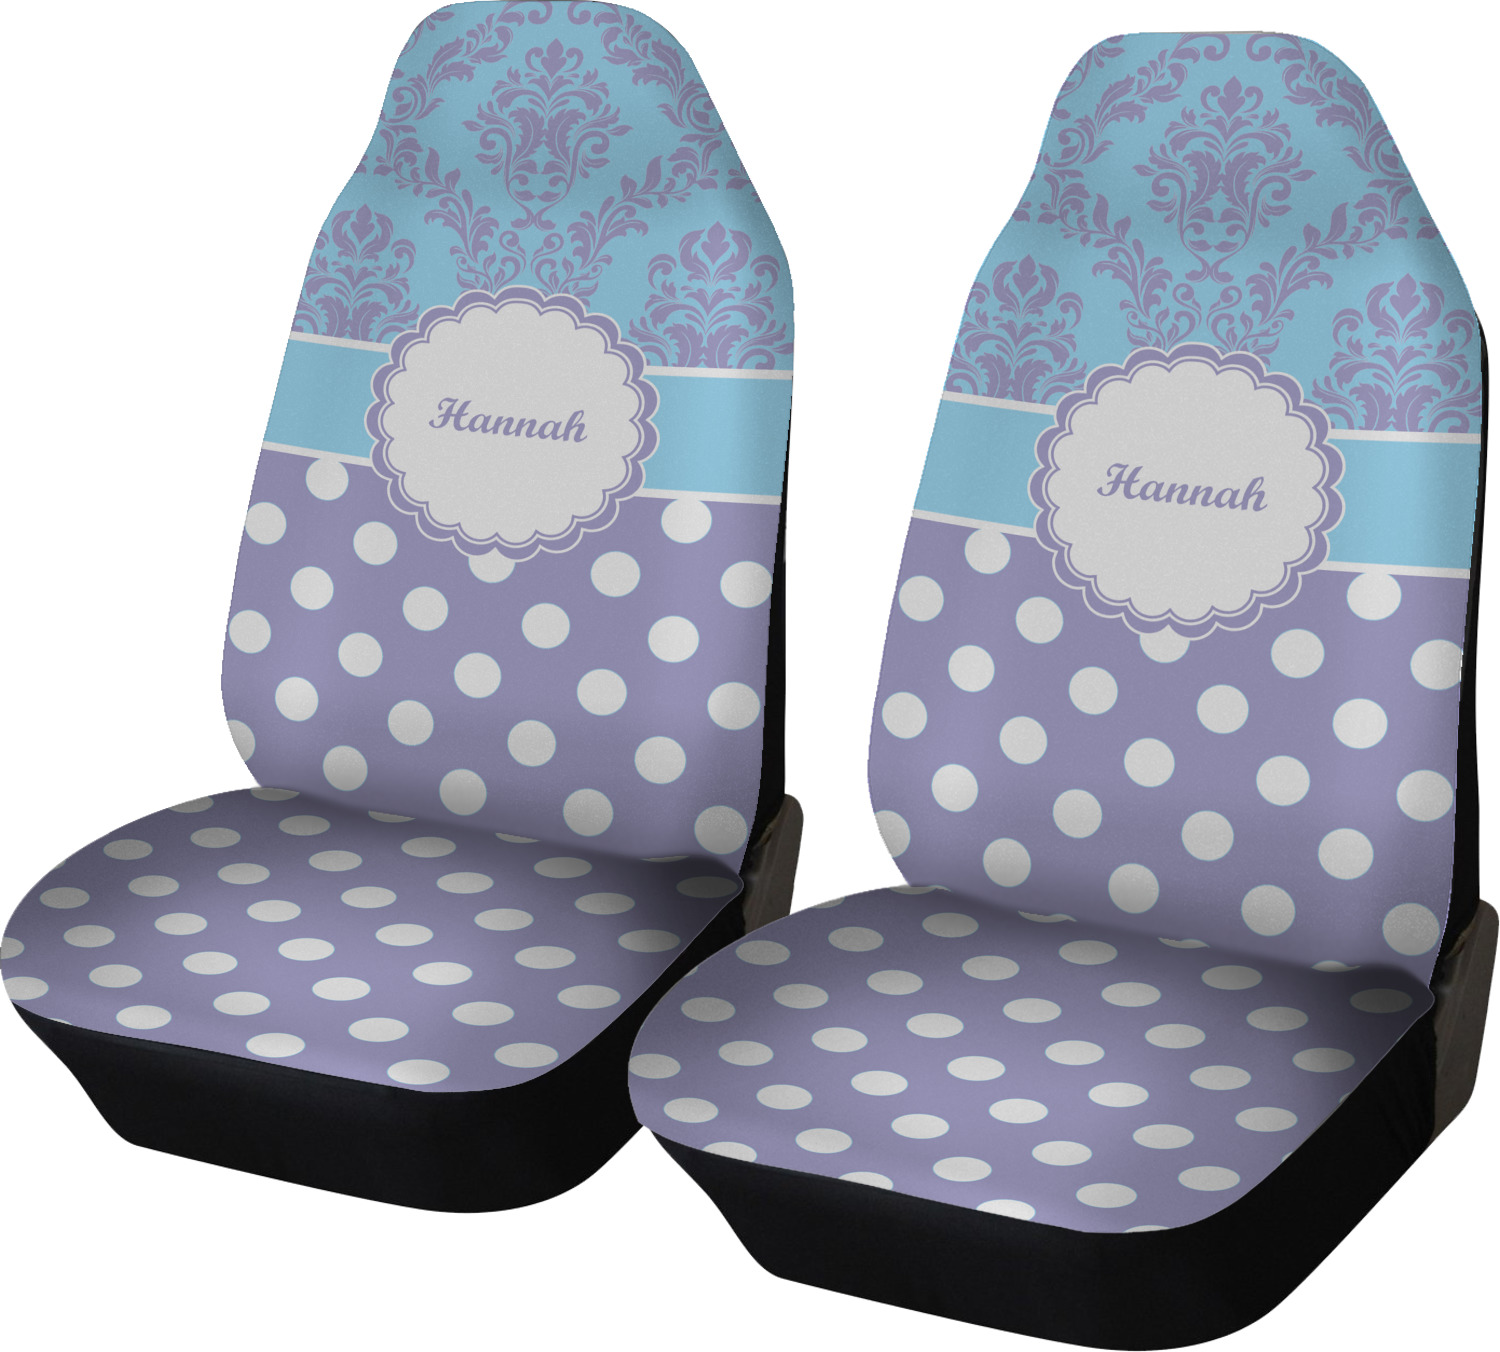 https://www.youcustomizeit.com/common/MAKE/189795/Purple-Damask-Dots-Car-Seat-Covers-2.jpg?lm=1670566687